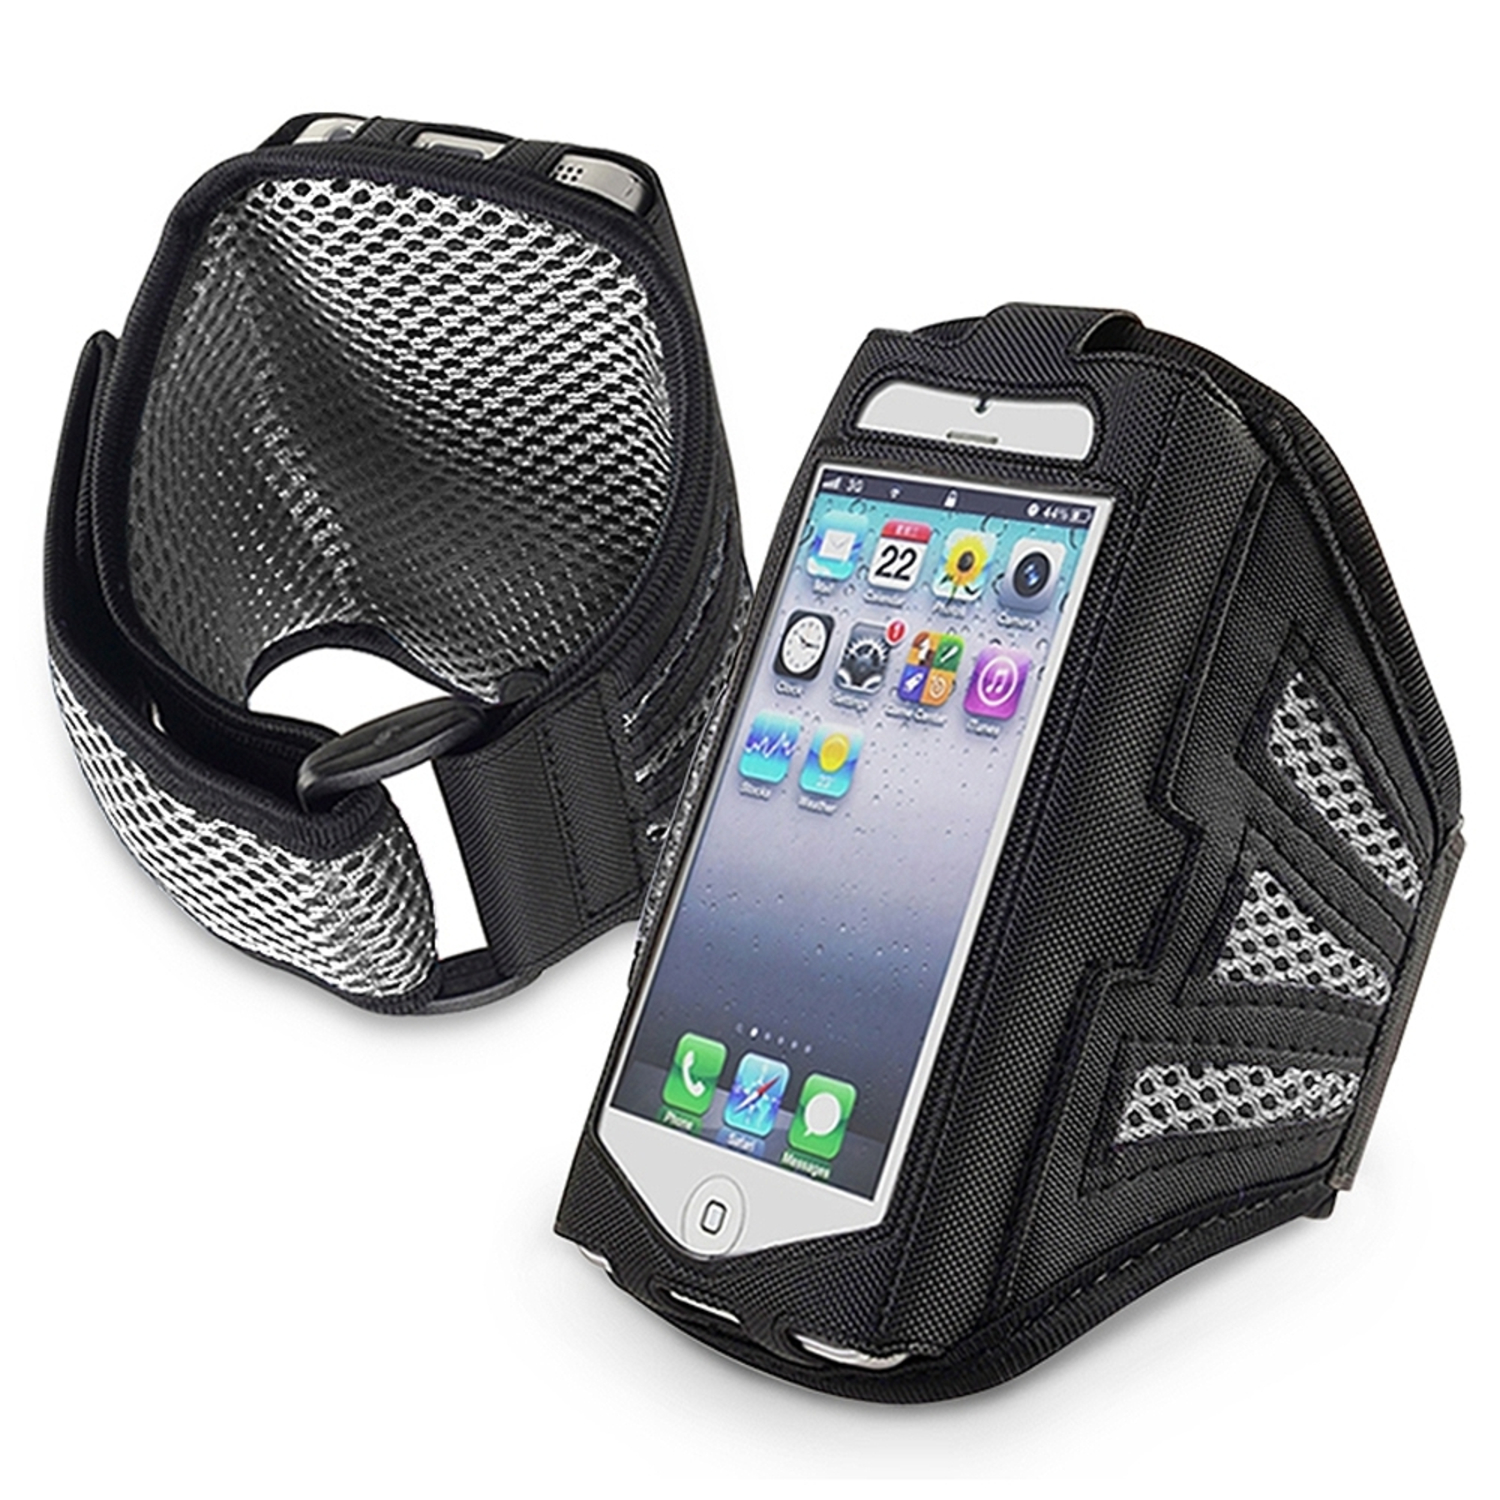 Insten Deluxe Armband for Sports Gym Running compatible with Apple iPhone 5 \/ 5C\/5S\/SE\/ touch 5th\/6th Generation, Black\/ Silver